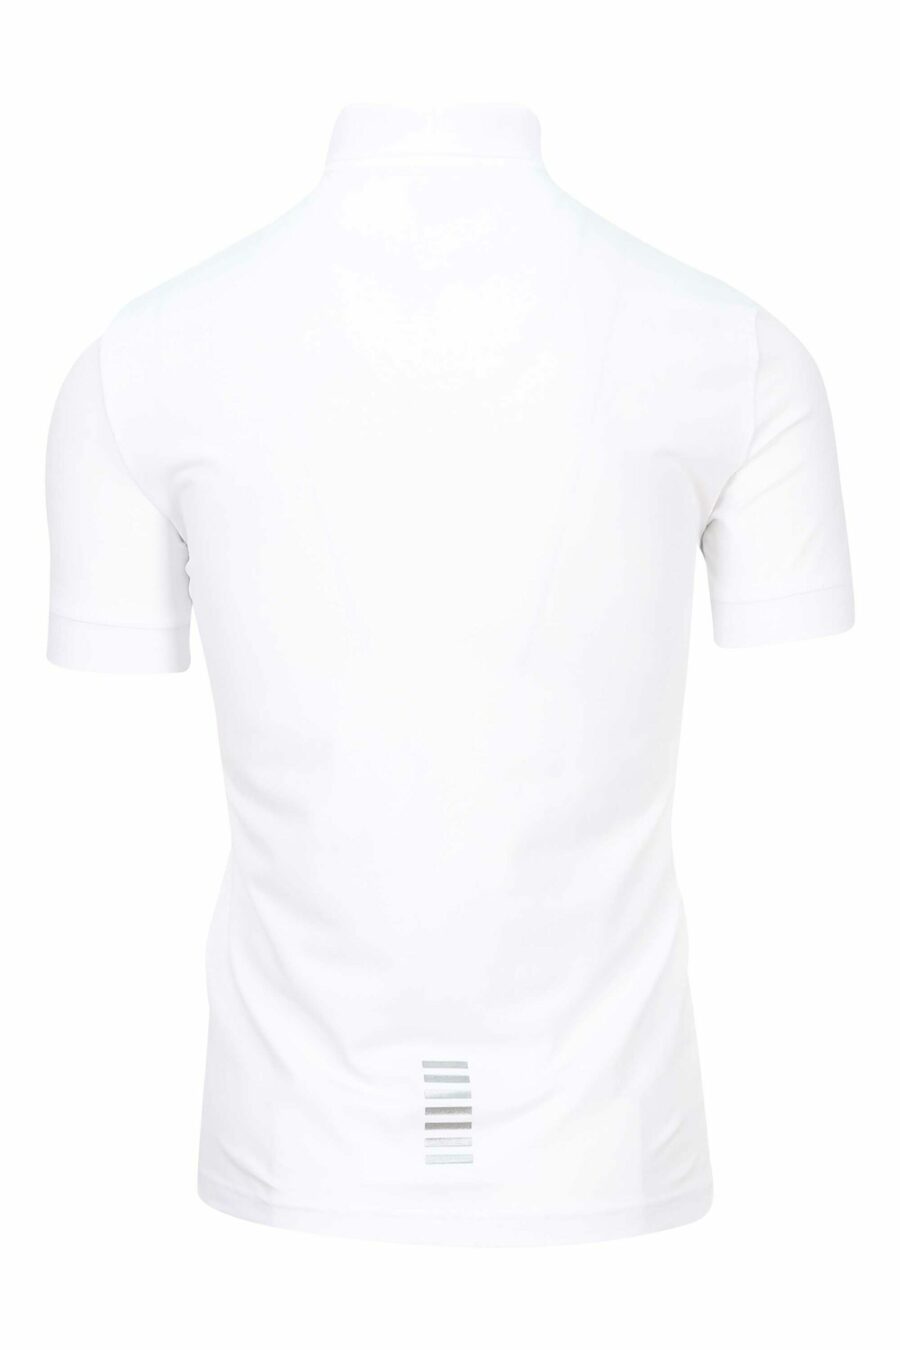 White polo shirt with silver gradient mini-logo "lux identity" - 8055187159944 2 scaled